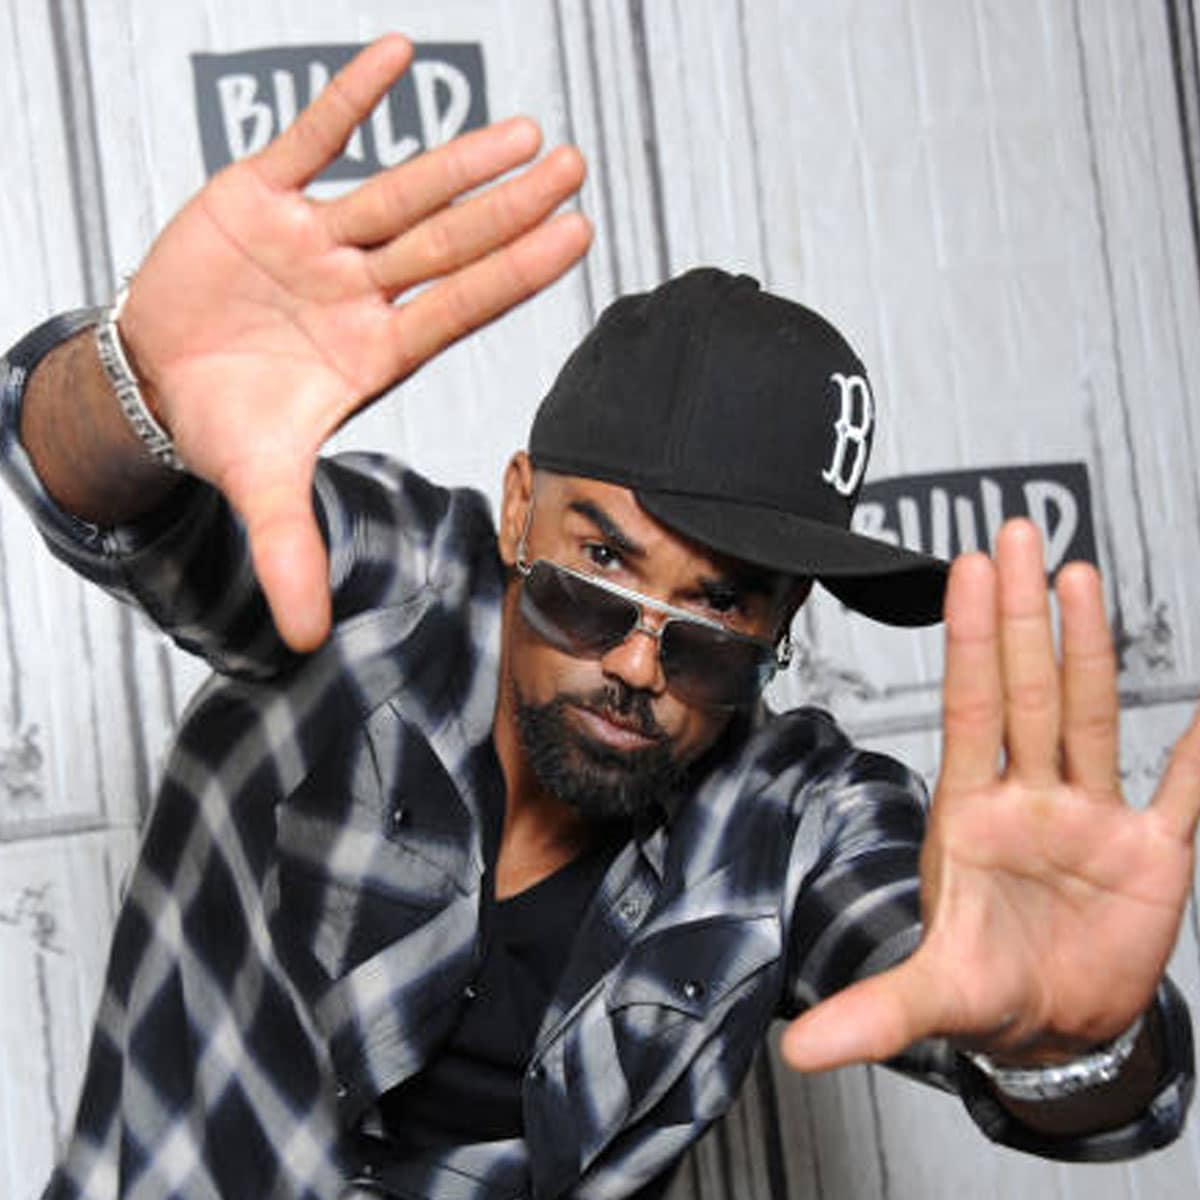 Shemar Moore visits Build to discuss 'S.W.A.T.' at Build Studio